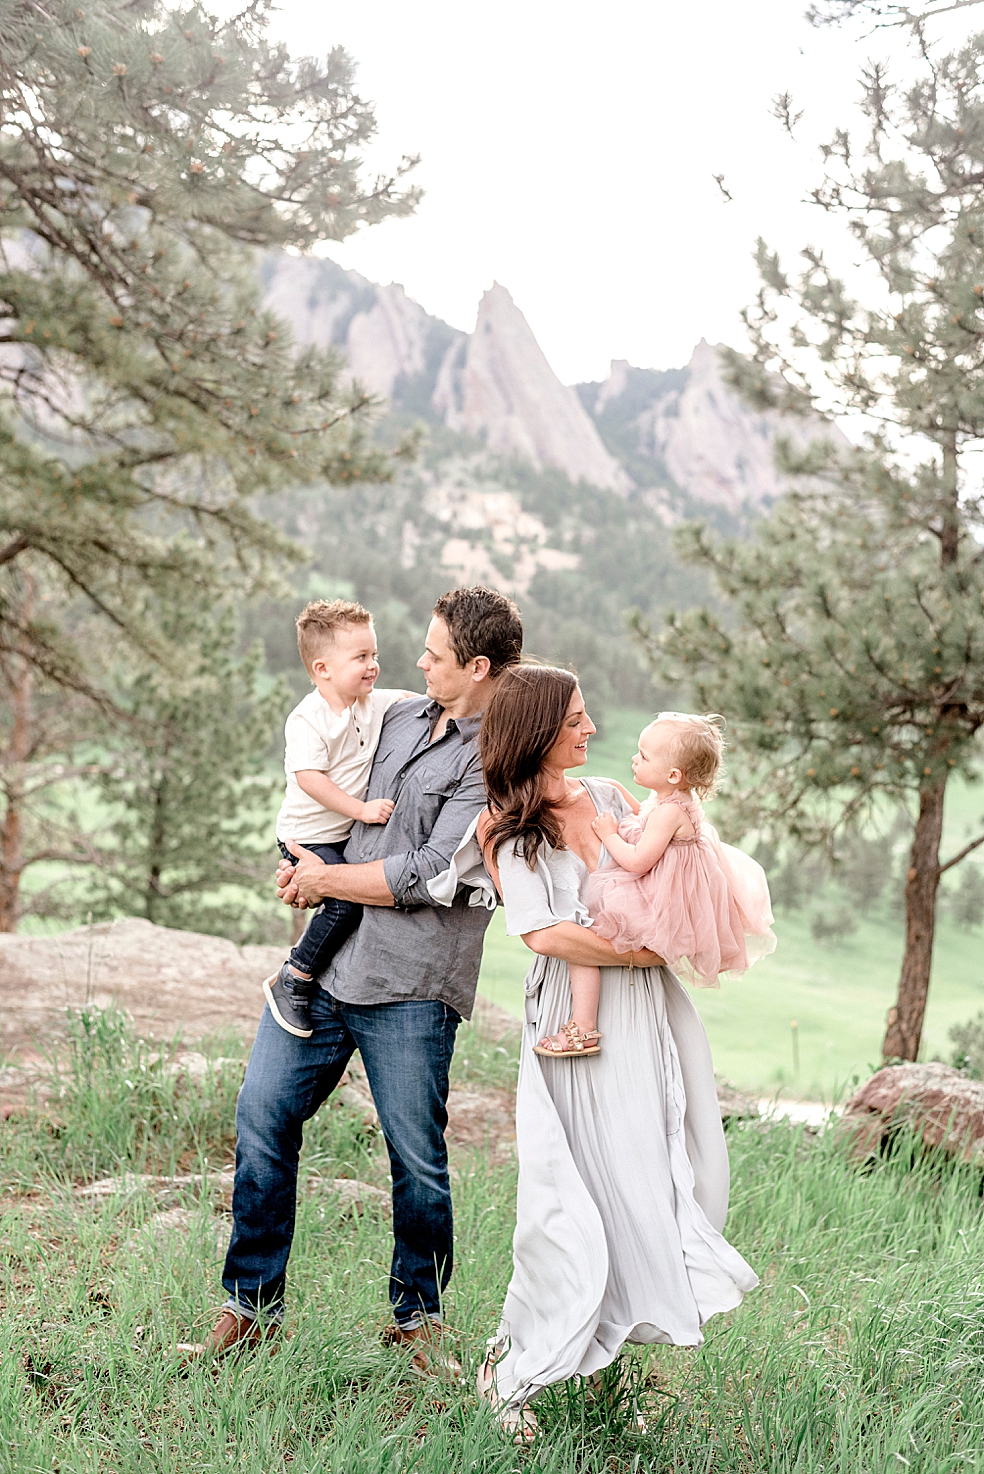 Mom and dad interacting with their little ones | Photo by Jessica Lee Photography